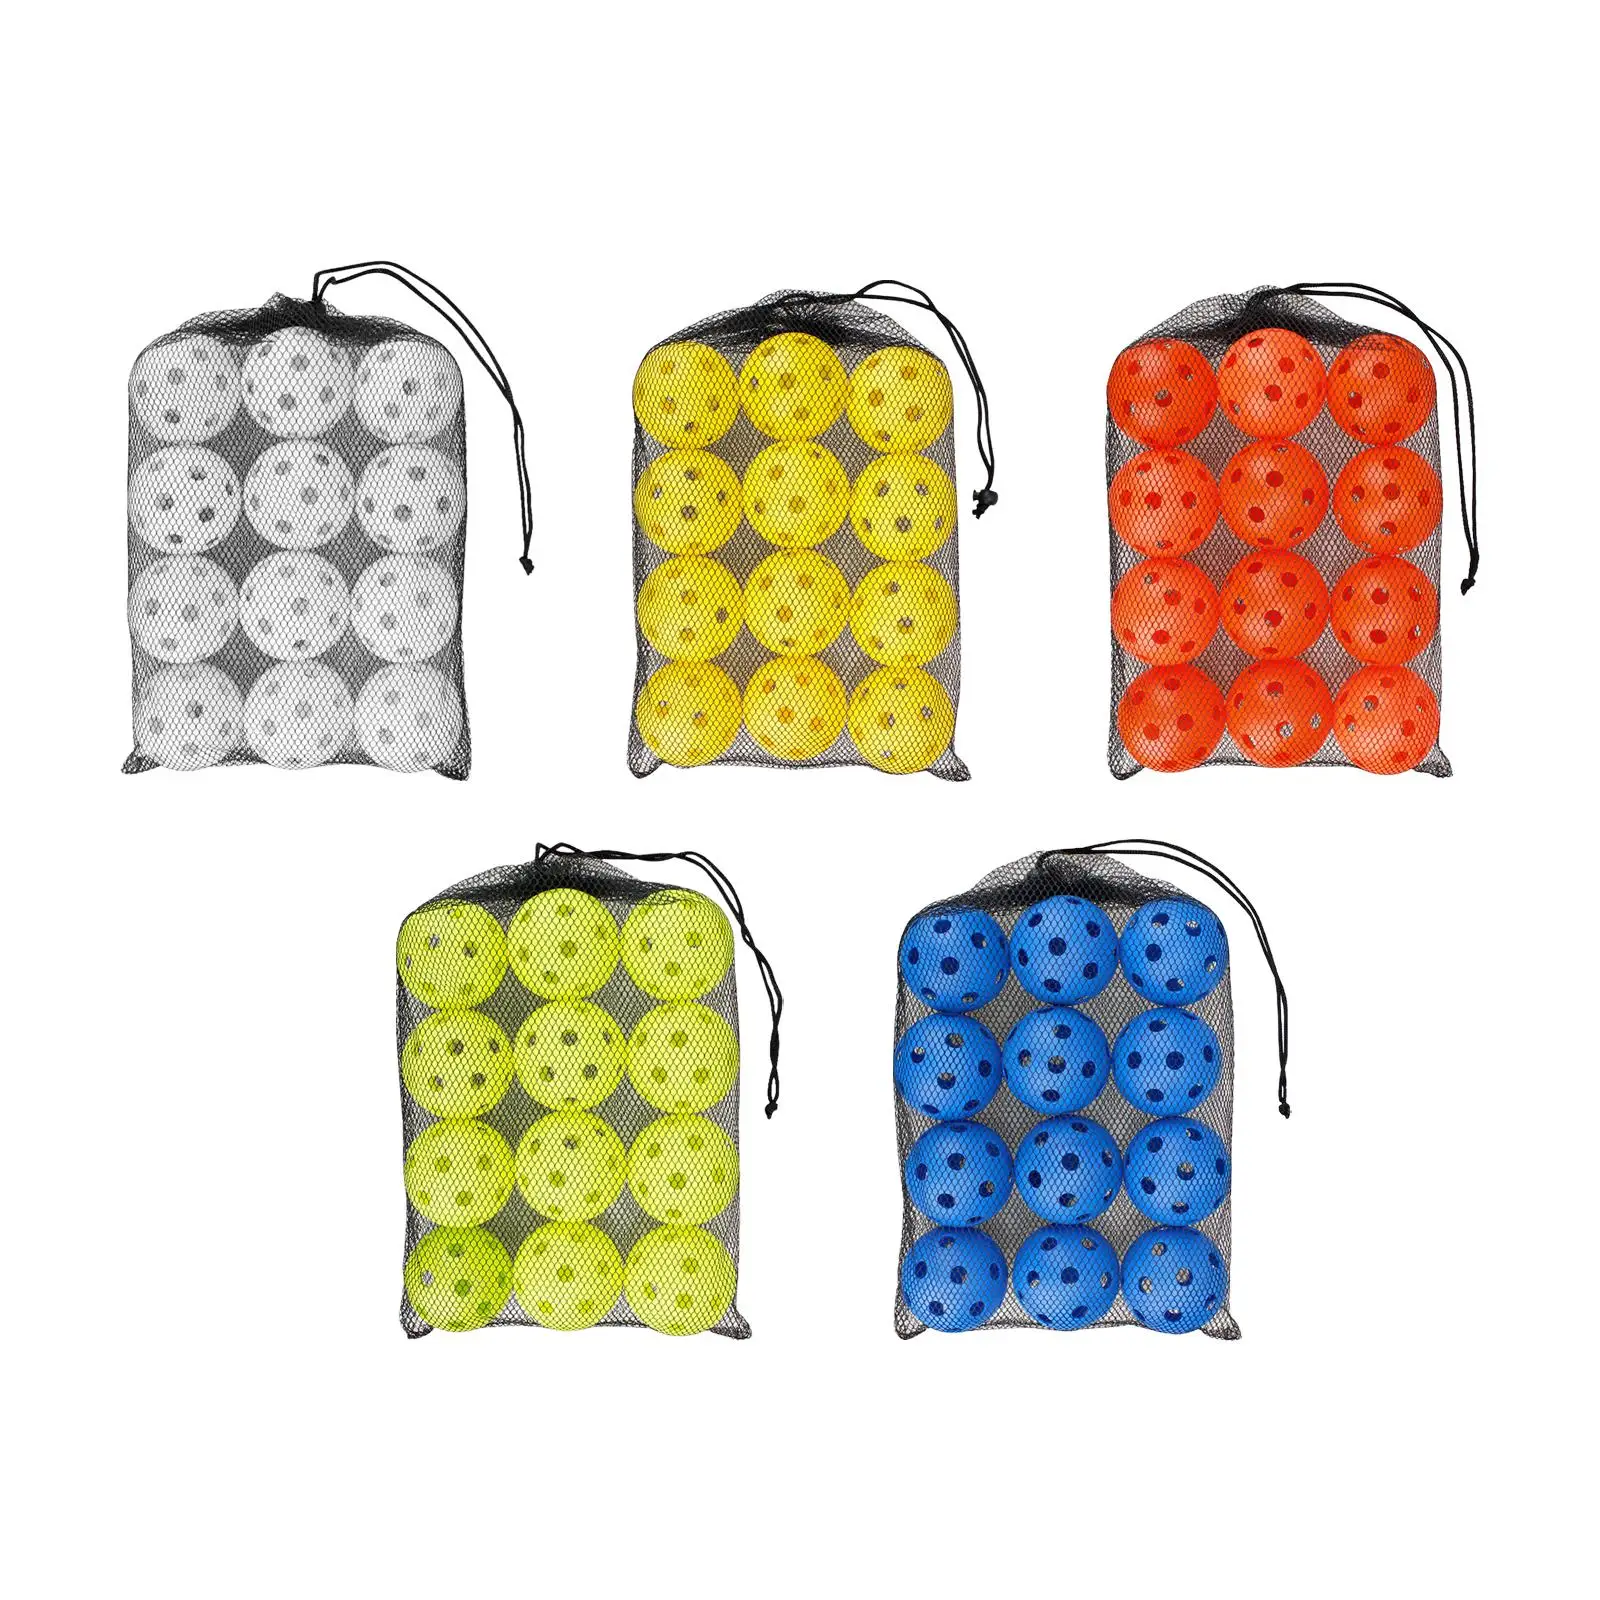 12x Pickleball Balls Professional Pickle Ball Adult Outdoor Sporting Goods Durable for Sanctioned Tournament Play with Mesh Bag